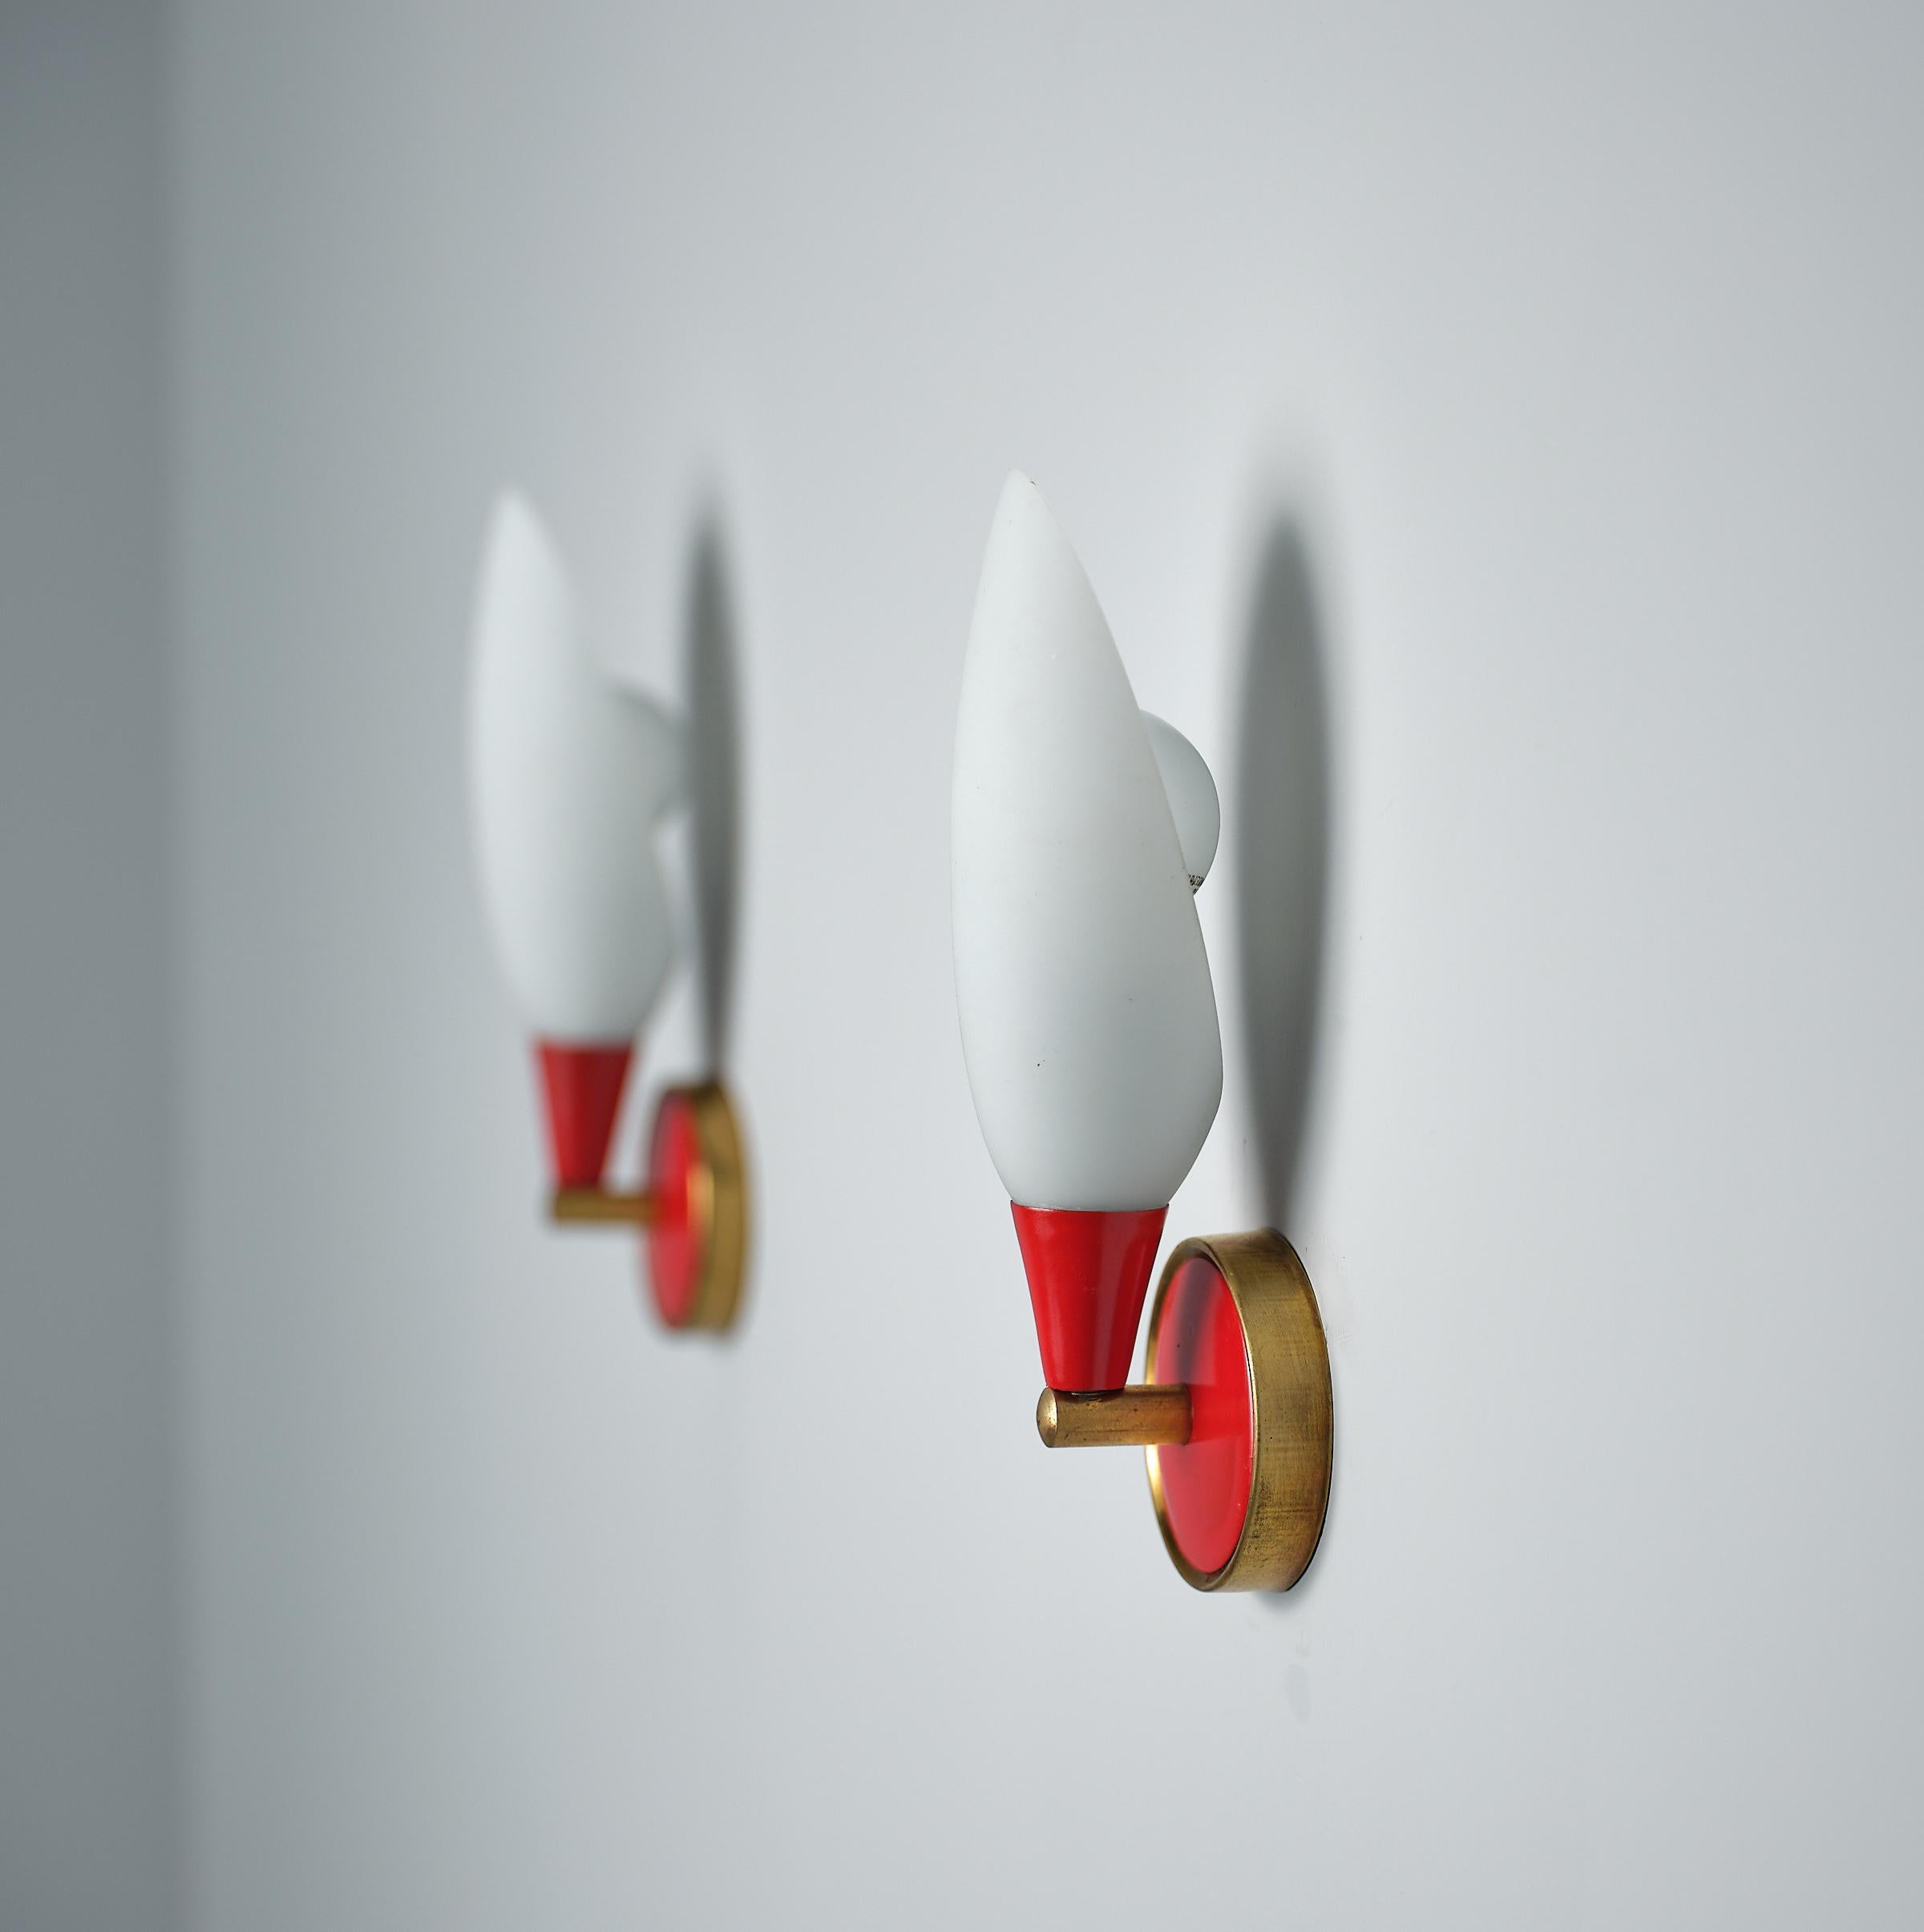 This pair of appliqués embodies the timeless elegance of Italian design from the 1950s. Crafted with precision in red lacquered metal and brass, these fixtures showcase a sleek modern style that seamlessly merges with classic aesthetics. The opaline